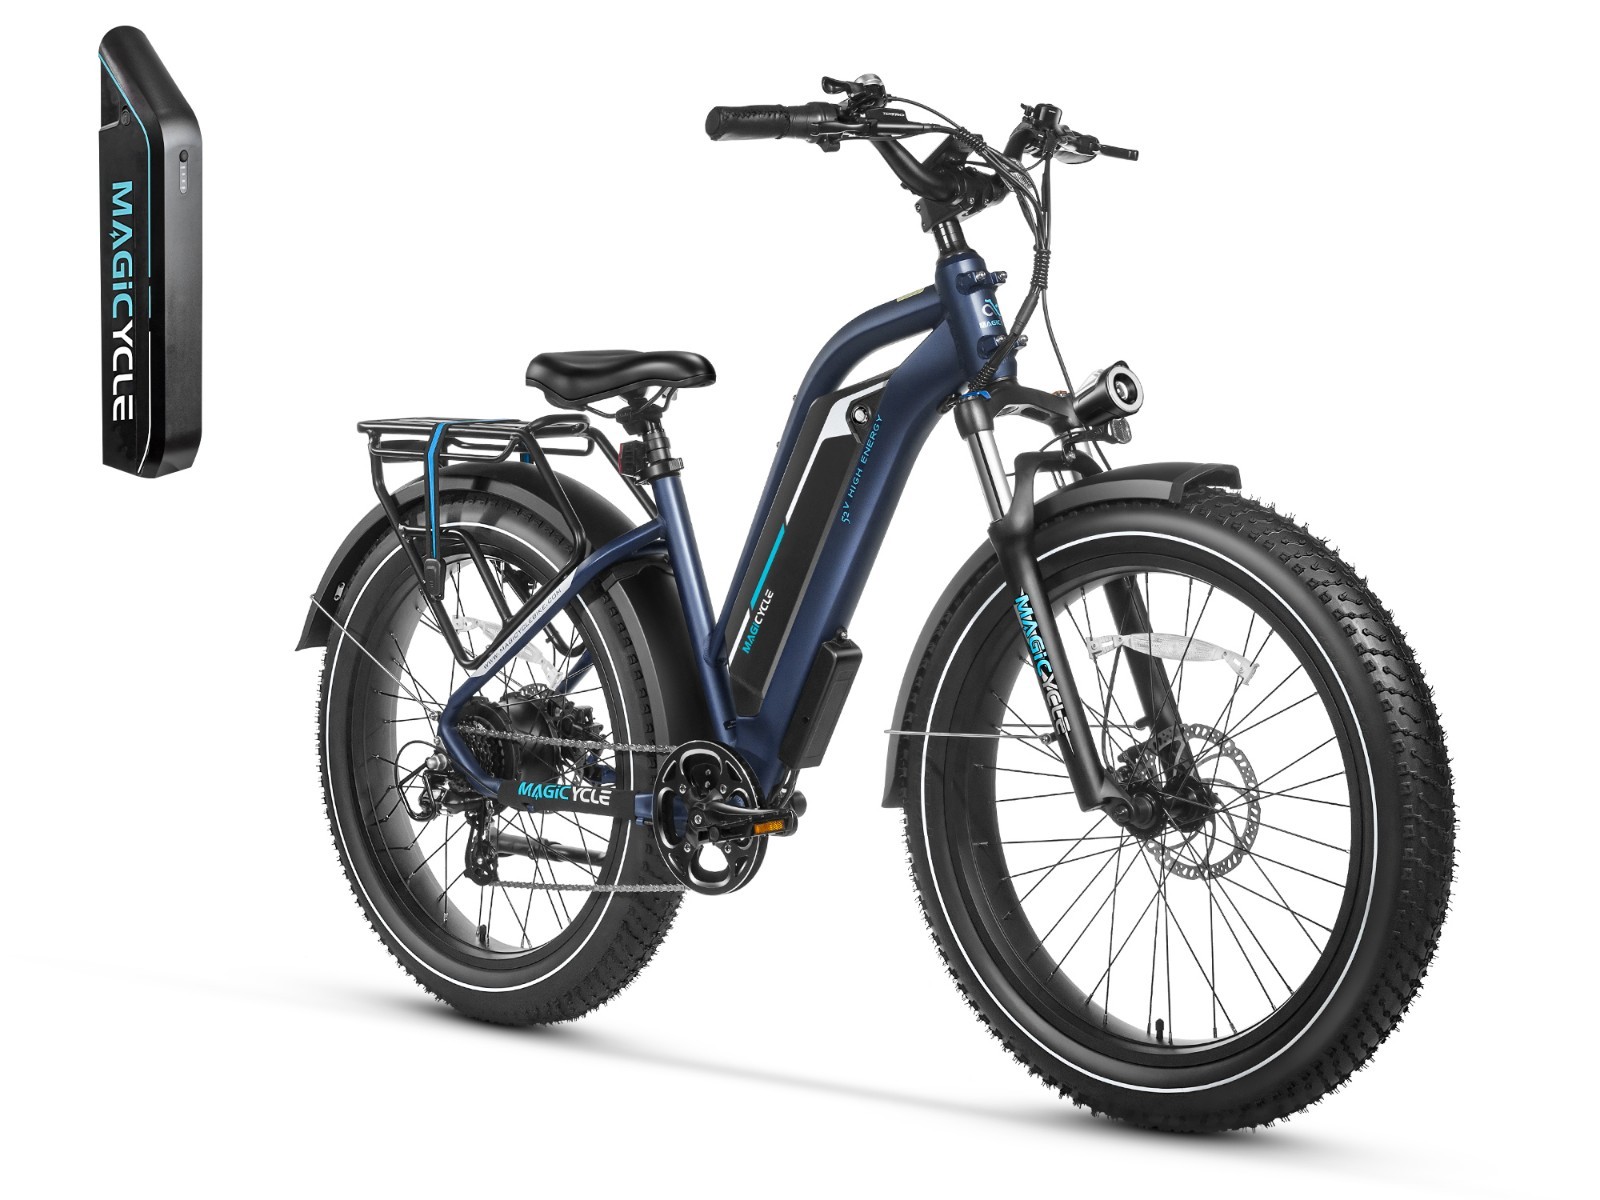 Combo Sale - Magicycle Cruiser Pro Ebike with Second 52V 15Ah Battery